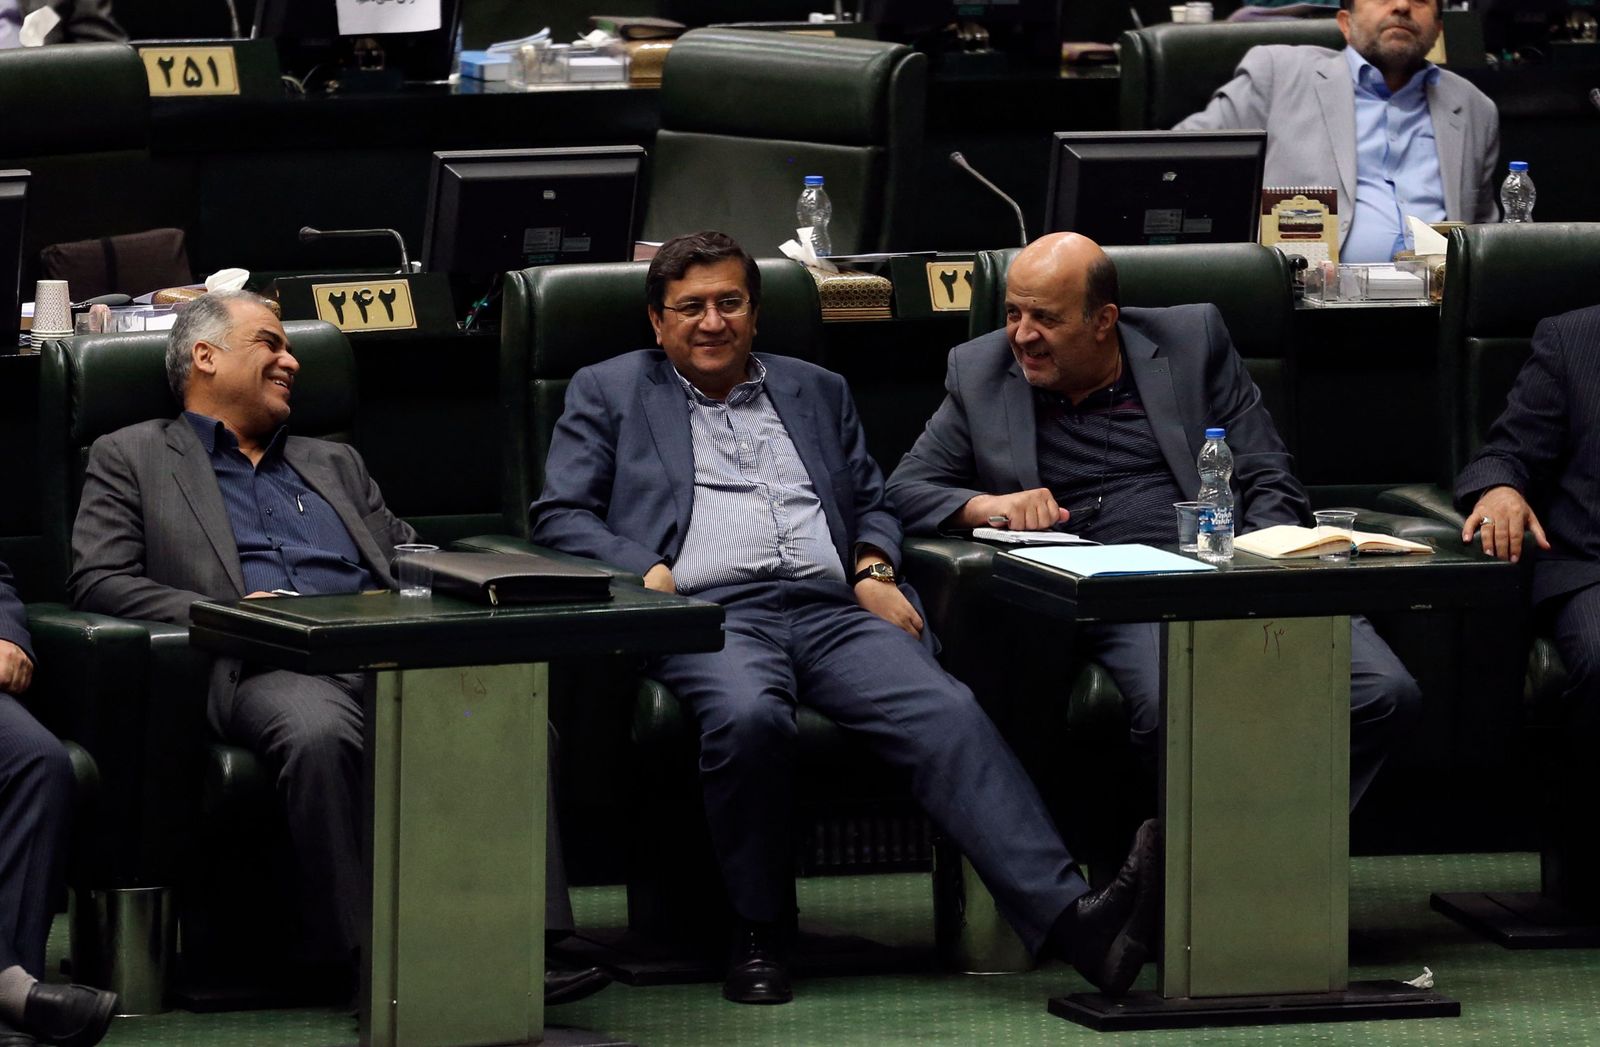 (FILES) In this file photo taken on October 7, 2018, Governor of the Central Bank of Iran Abdolnaser Hemmati (C) listens to a speech in parliament in Tehran. - Iran approved seven hopefuls to run in next month's presidential poll, with judiciary chief Ebrahim Raisi among the mainly ultraconservative candidates, while heavyweights Mahmoud Ahmadinejad and Ali Larijani were barred. (Photo by ATTA KENARE / AFP) - AFP